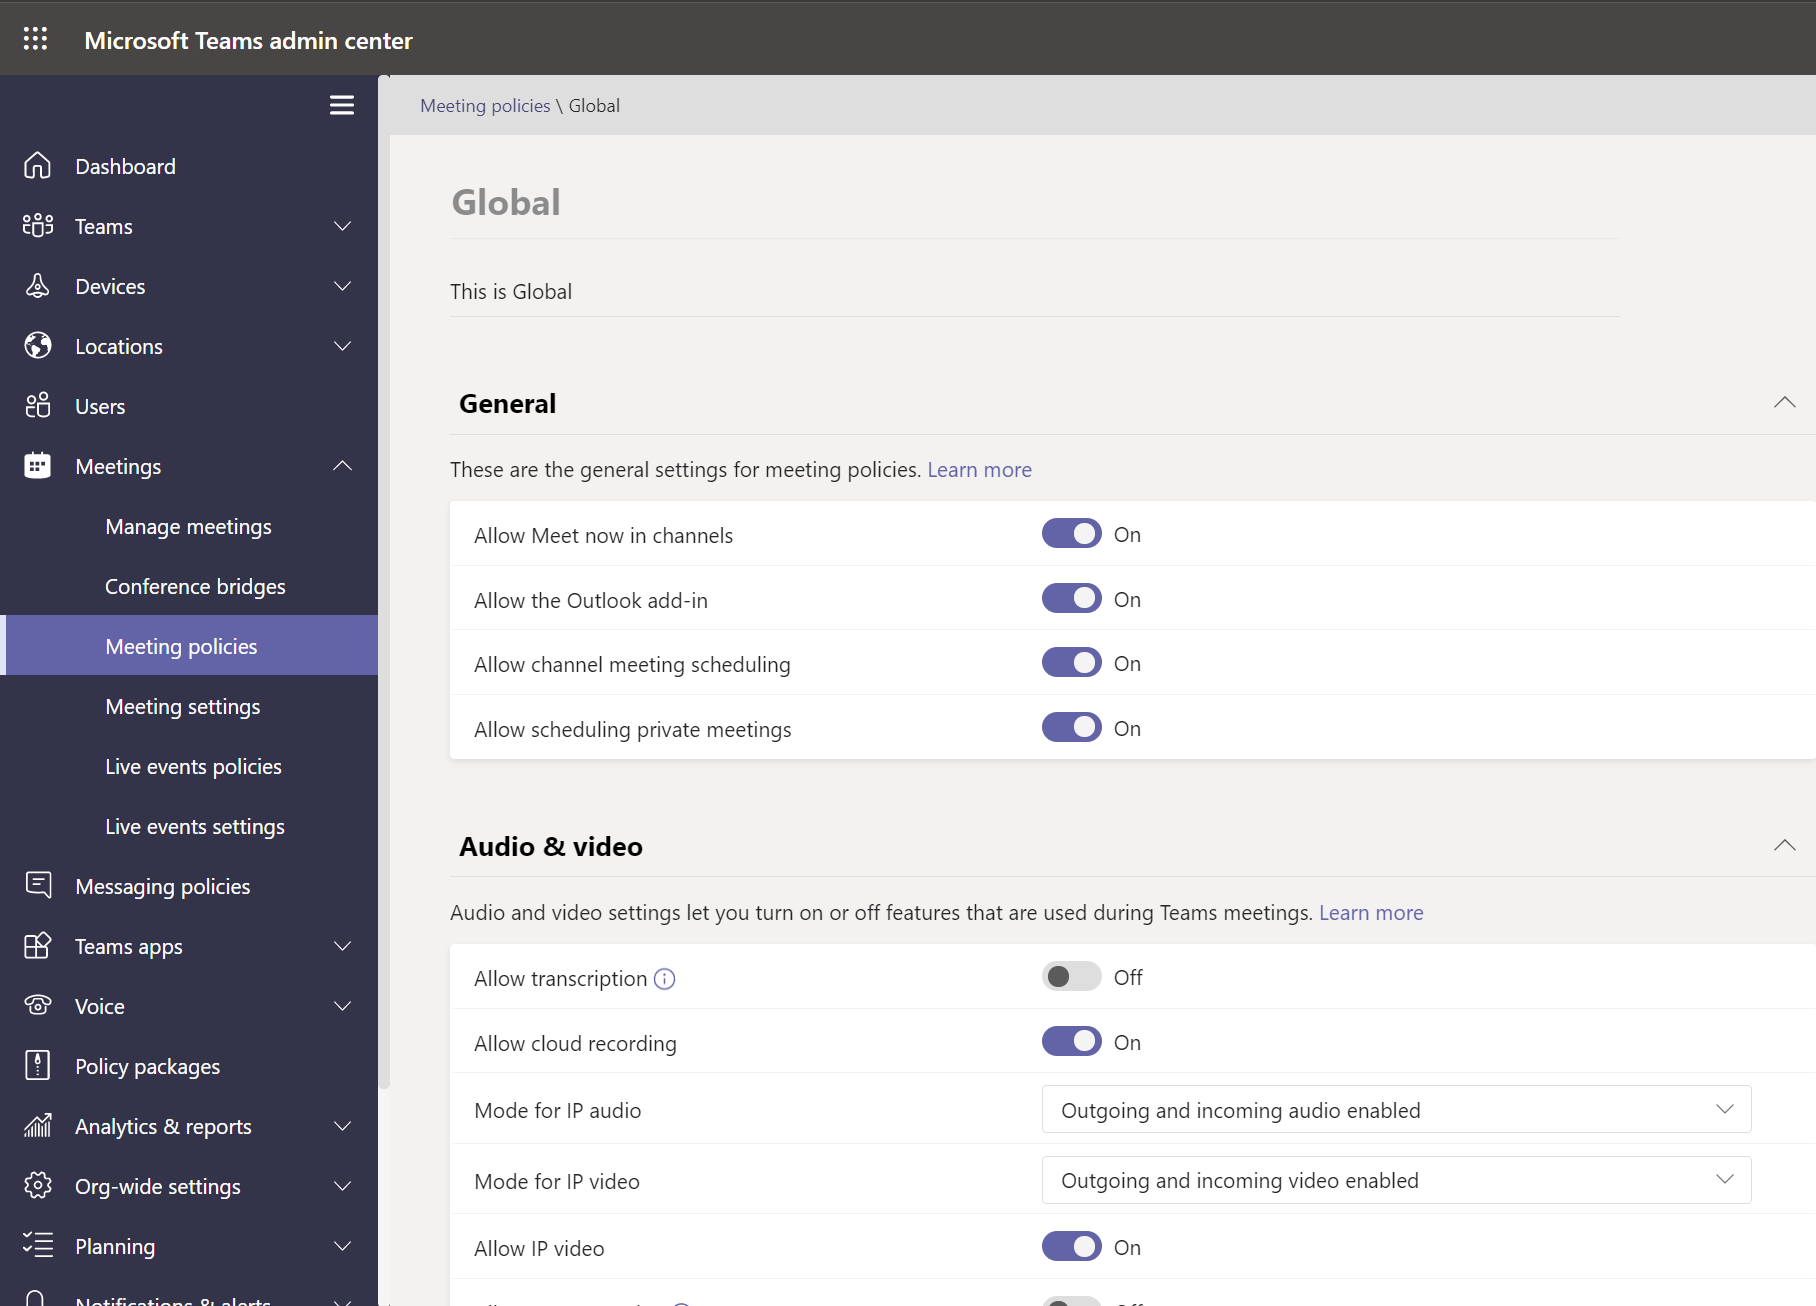 Update global policy in Teams admin center.